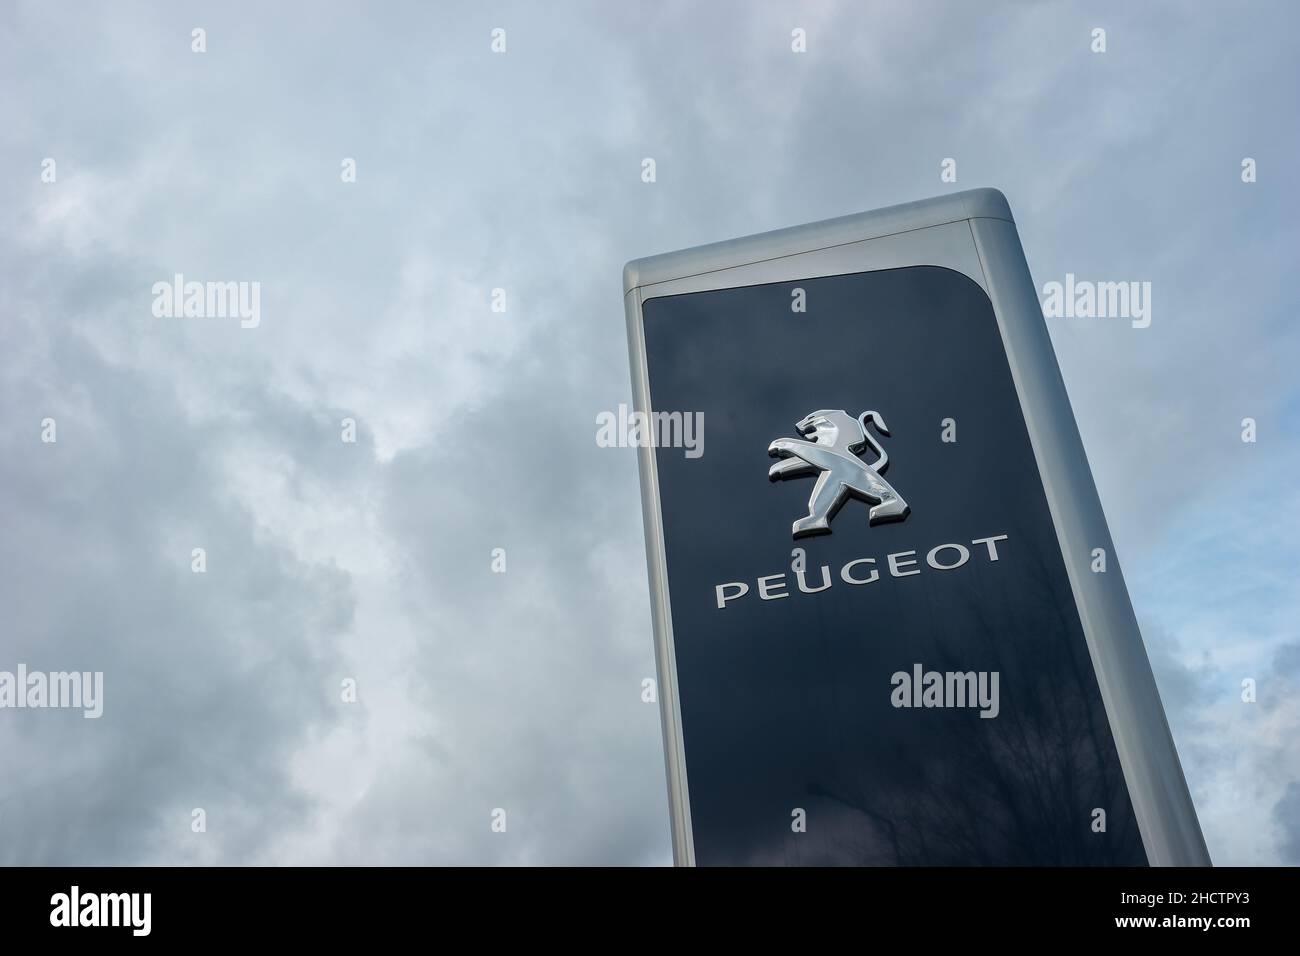 Peugeot dealership sign against cloudy sky. Peugeot is a French automobile manufacturer and part of Groupe PSA. Stock Photo